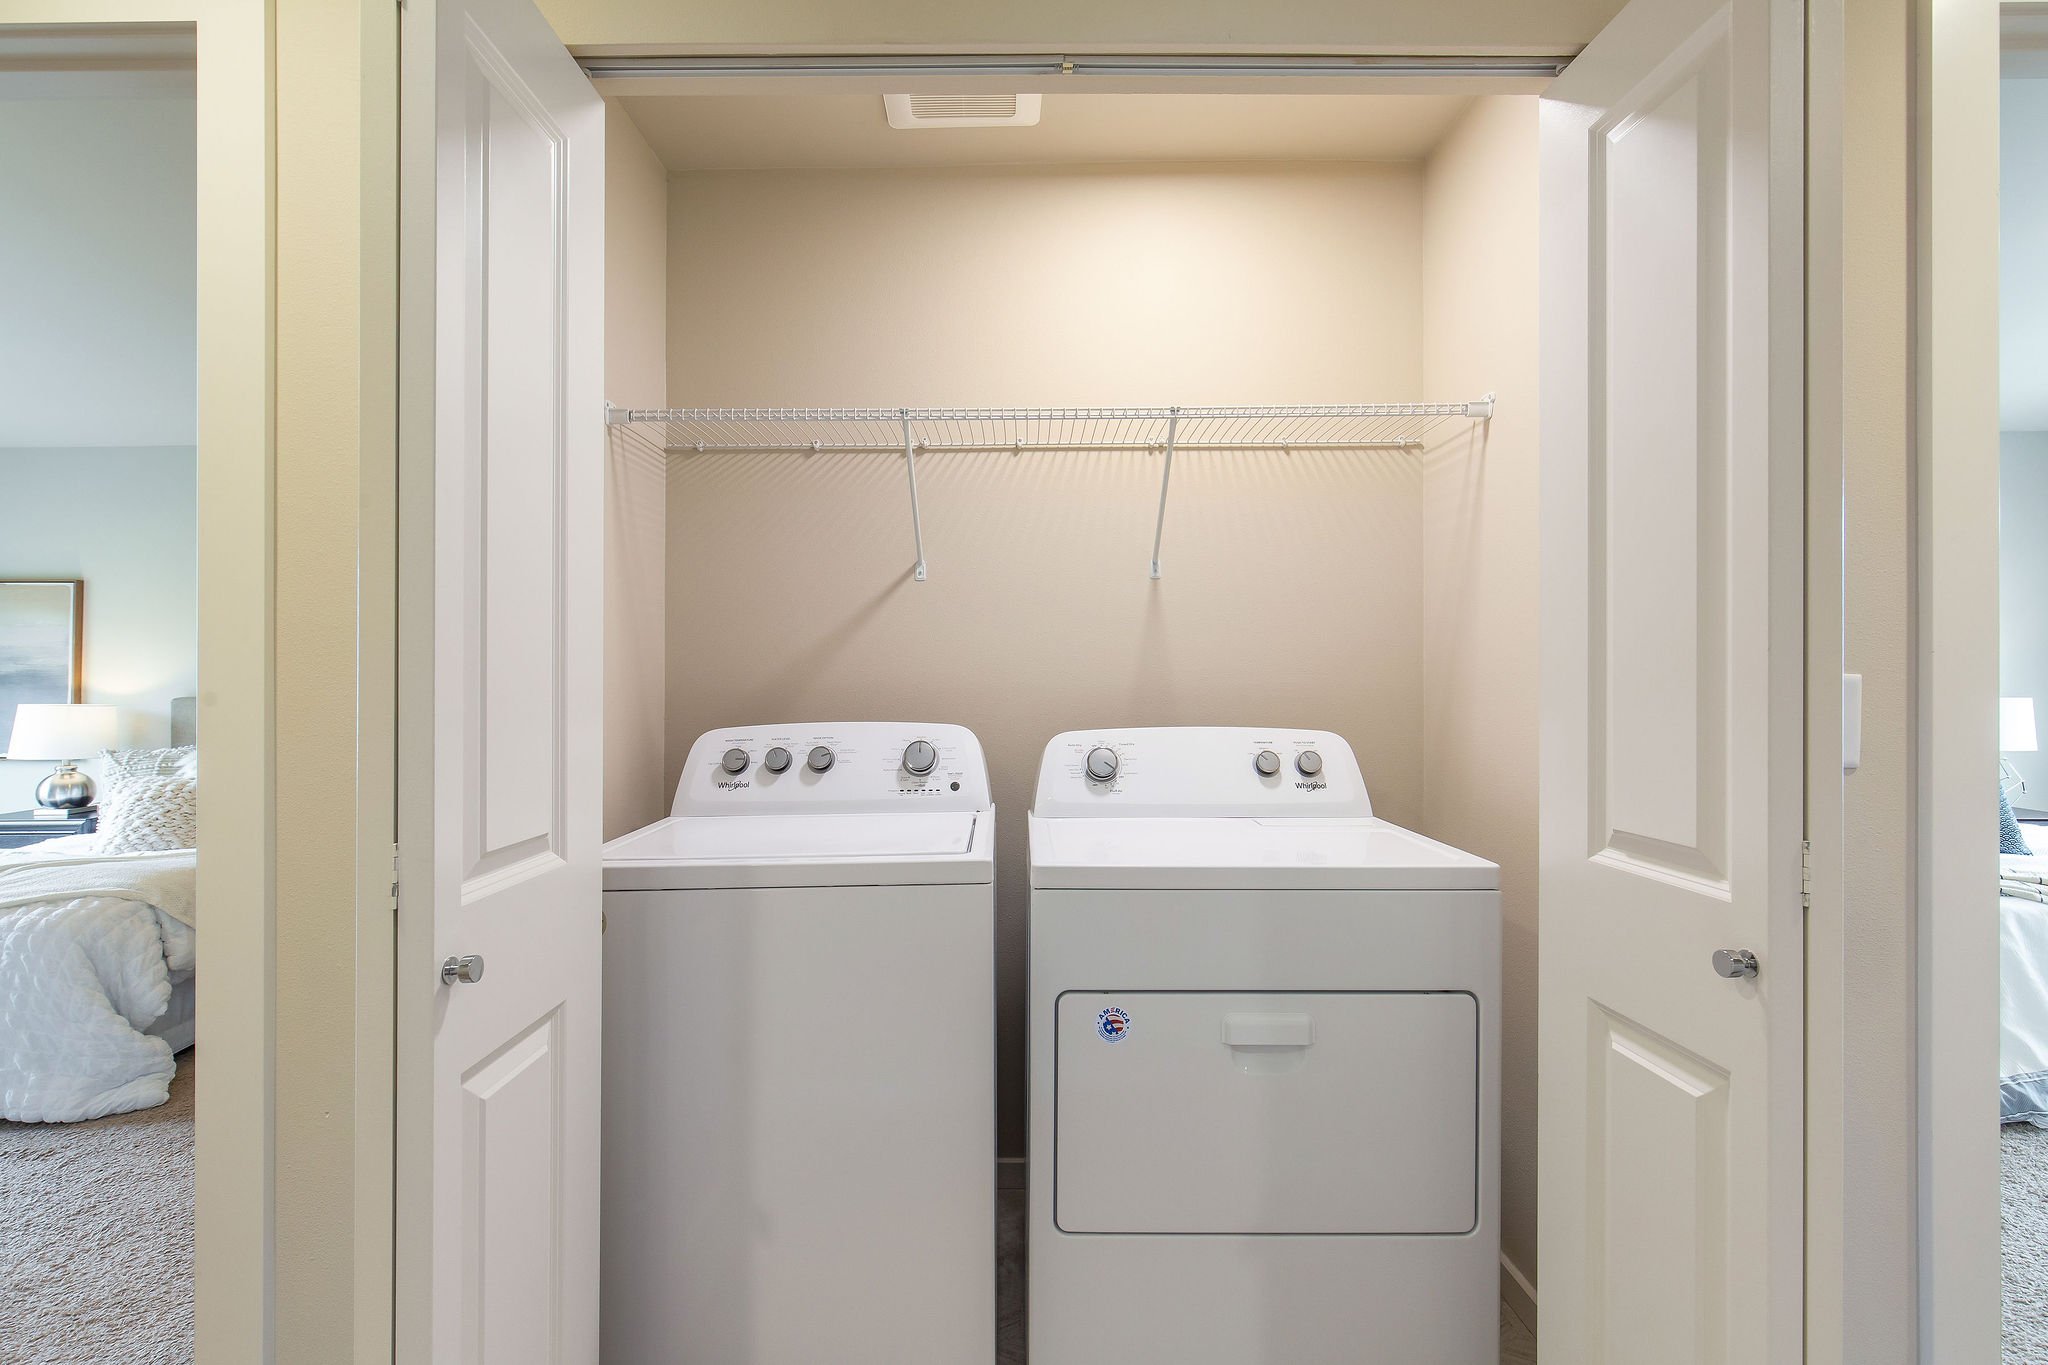  image description: interior of storage closet with washer and dryer 